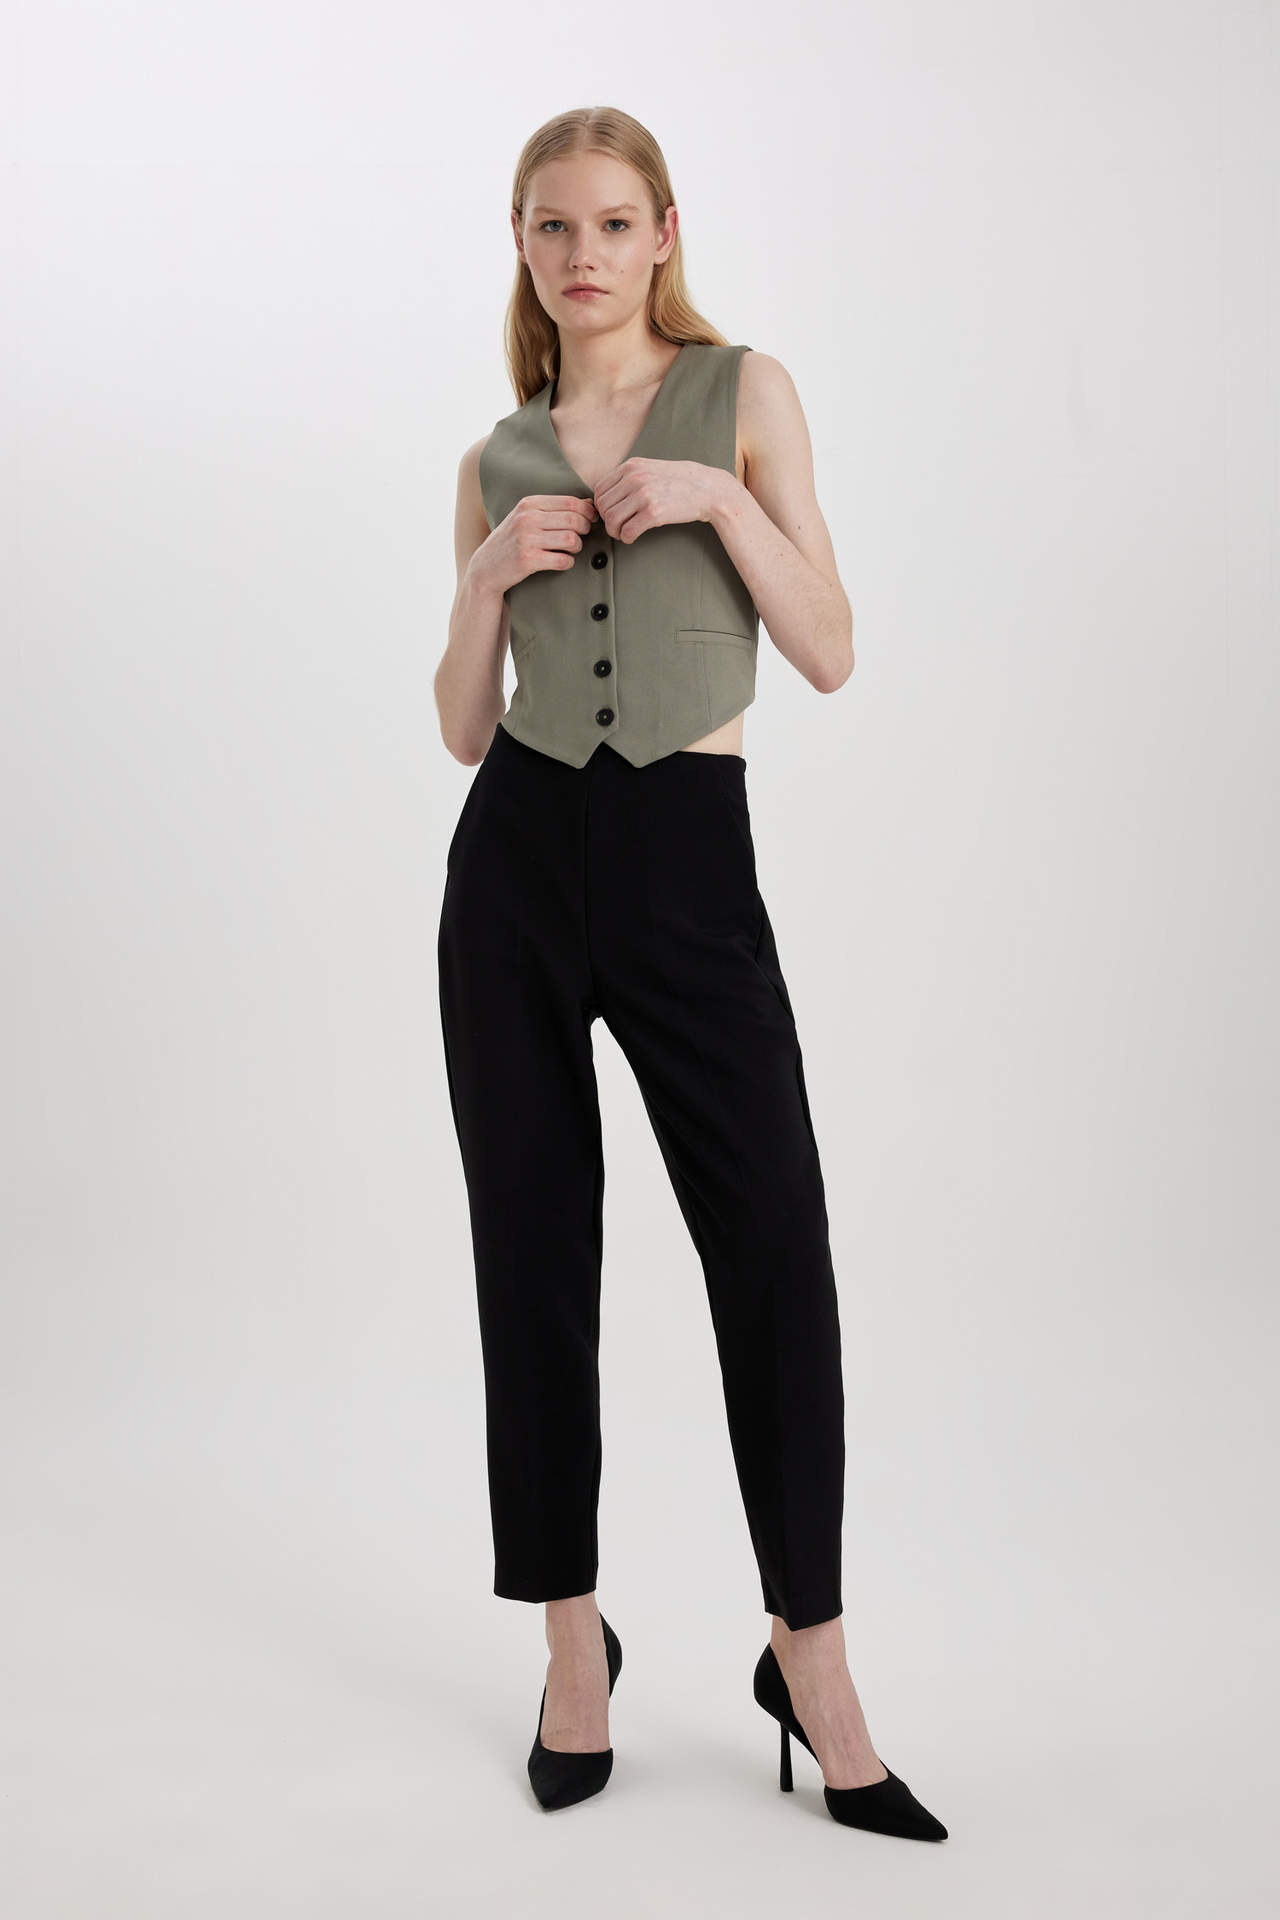 DEFACTO Carrot Fit Ankle Length With Pockets Trousers